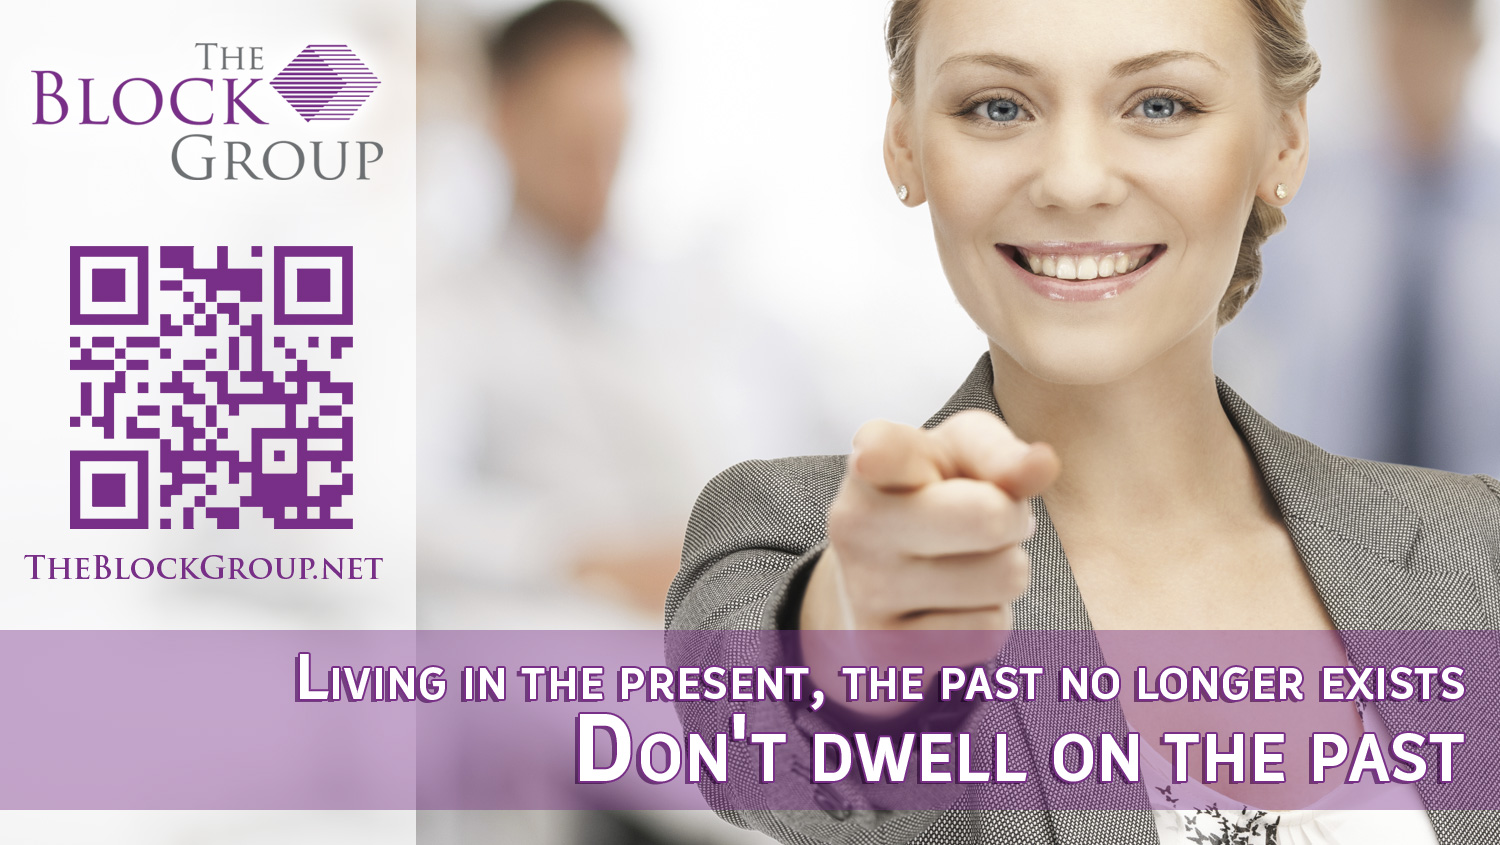 009-Dont-dwell-on-the-past